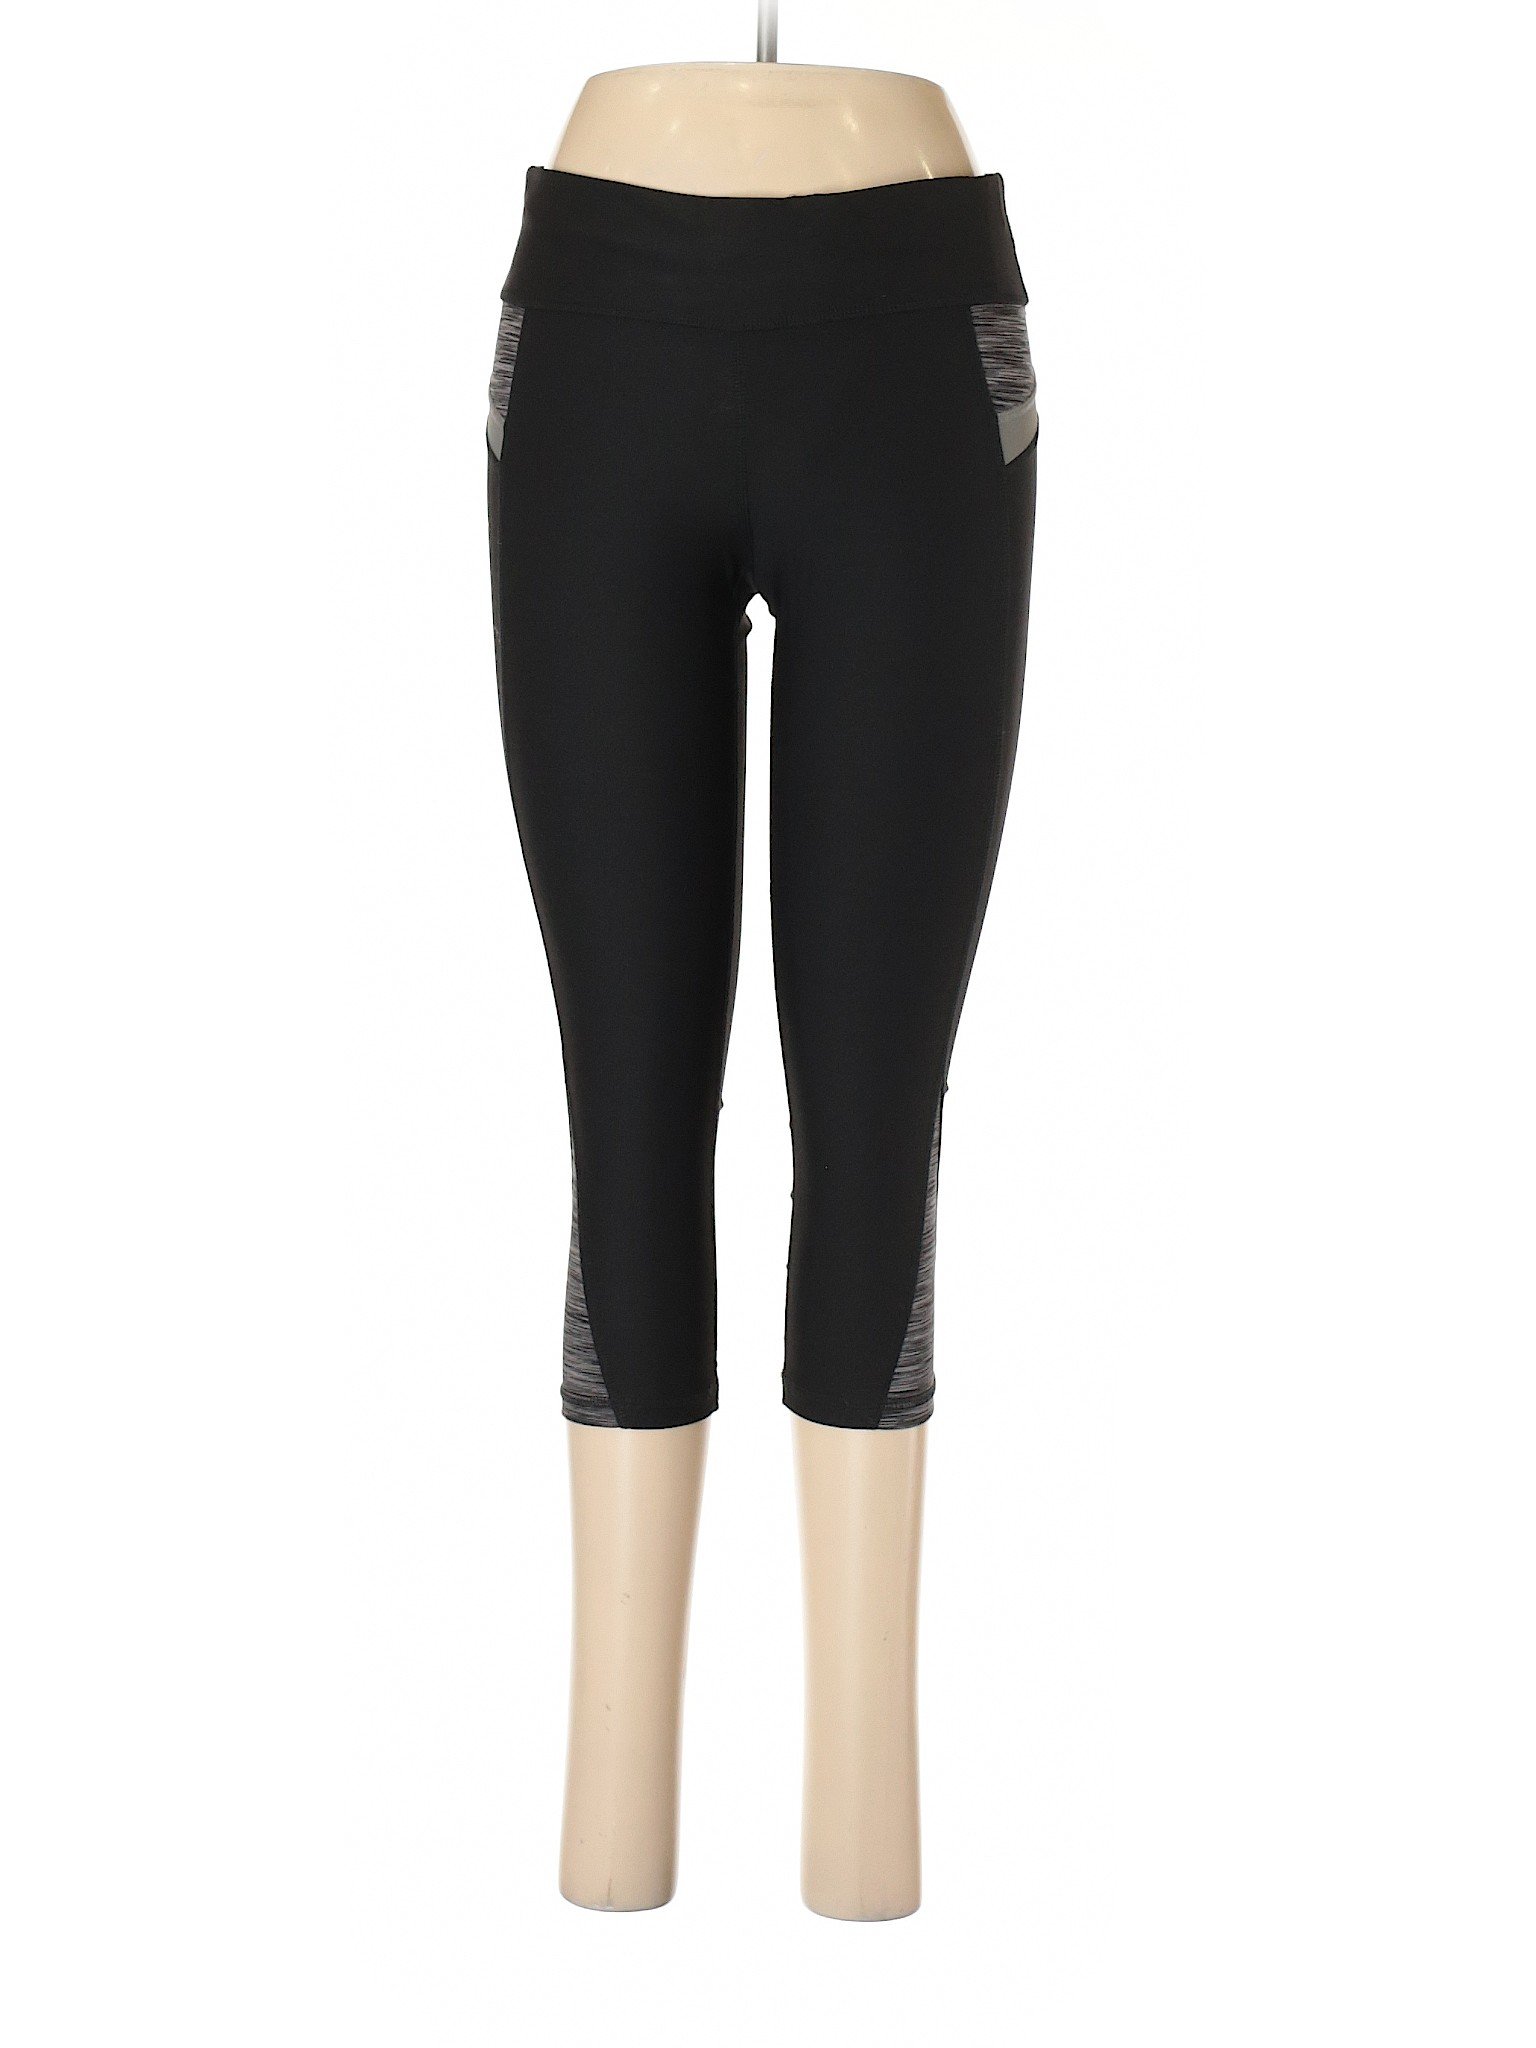 Xersion Solid Black Active Pants Size M - 66% off | thredUP